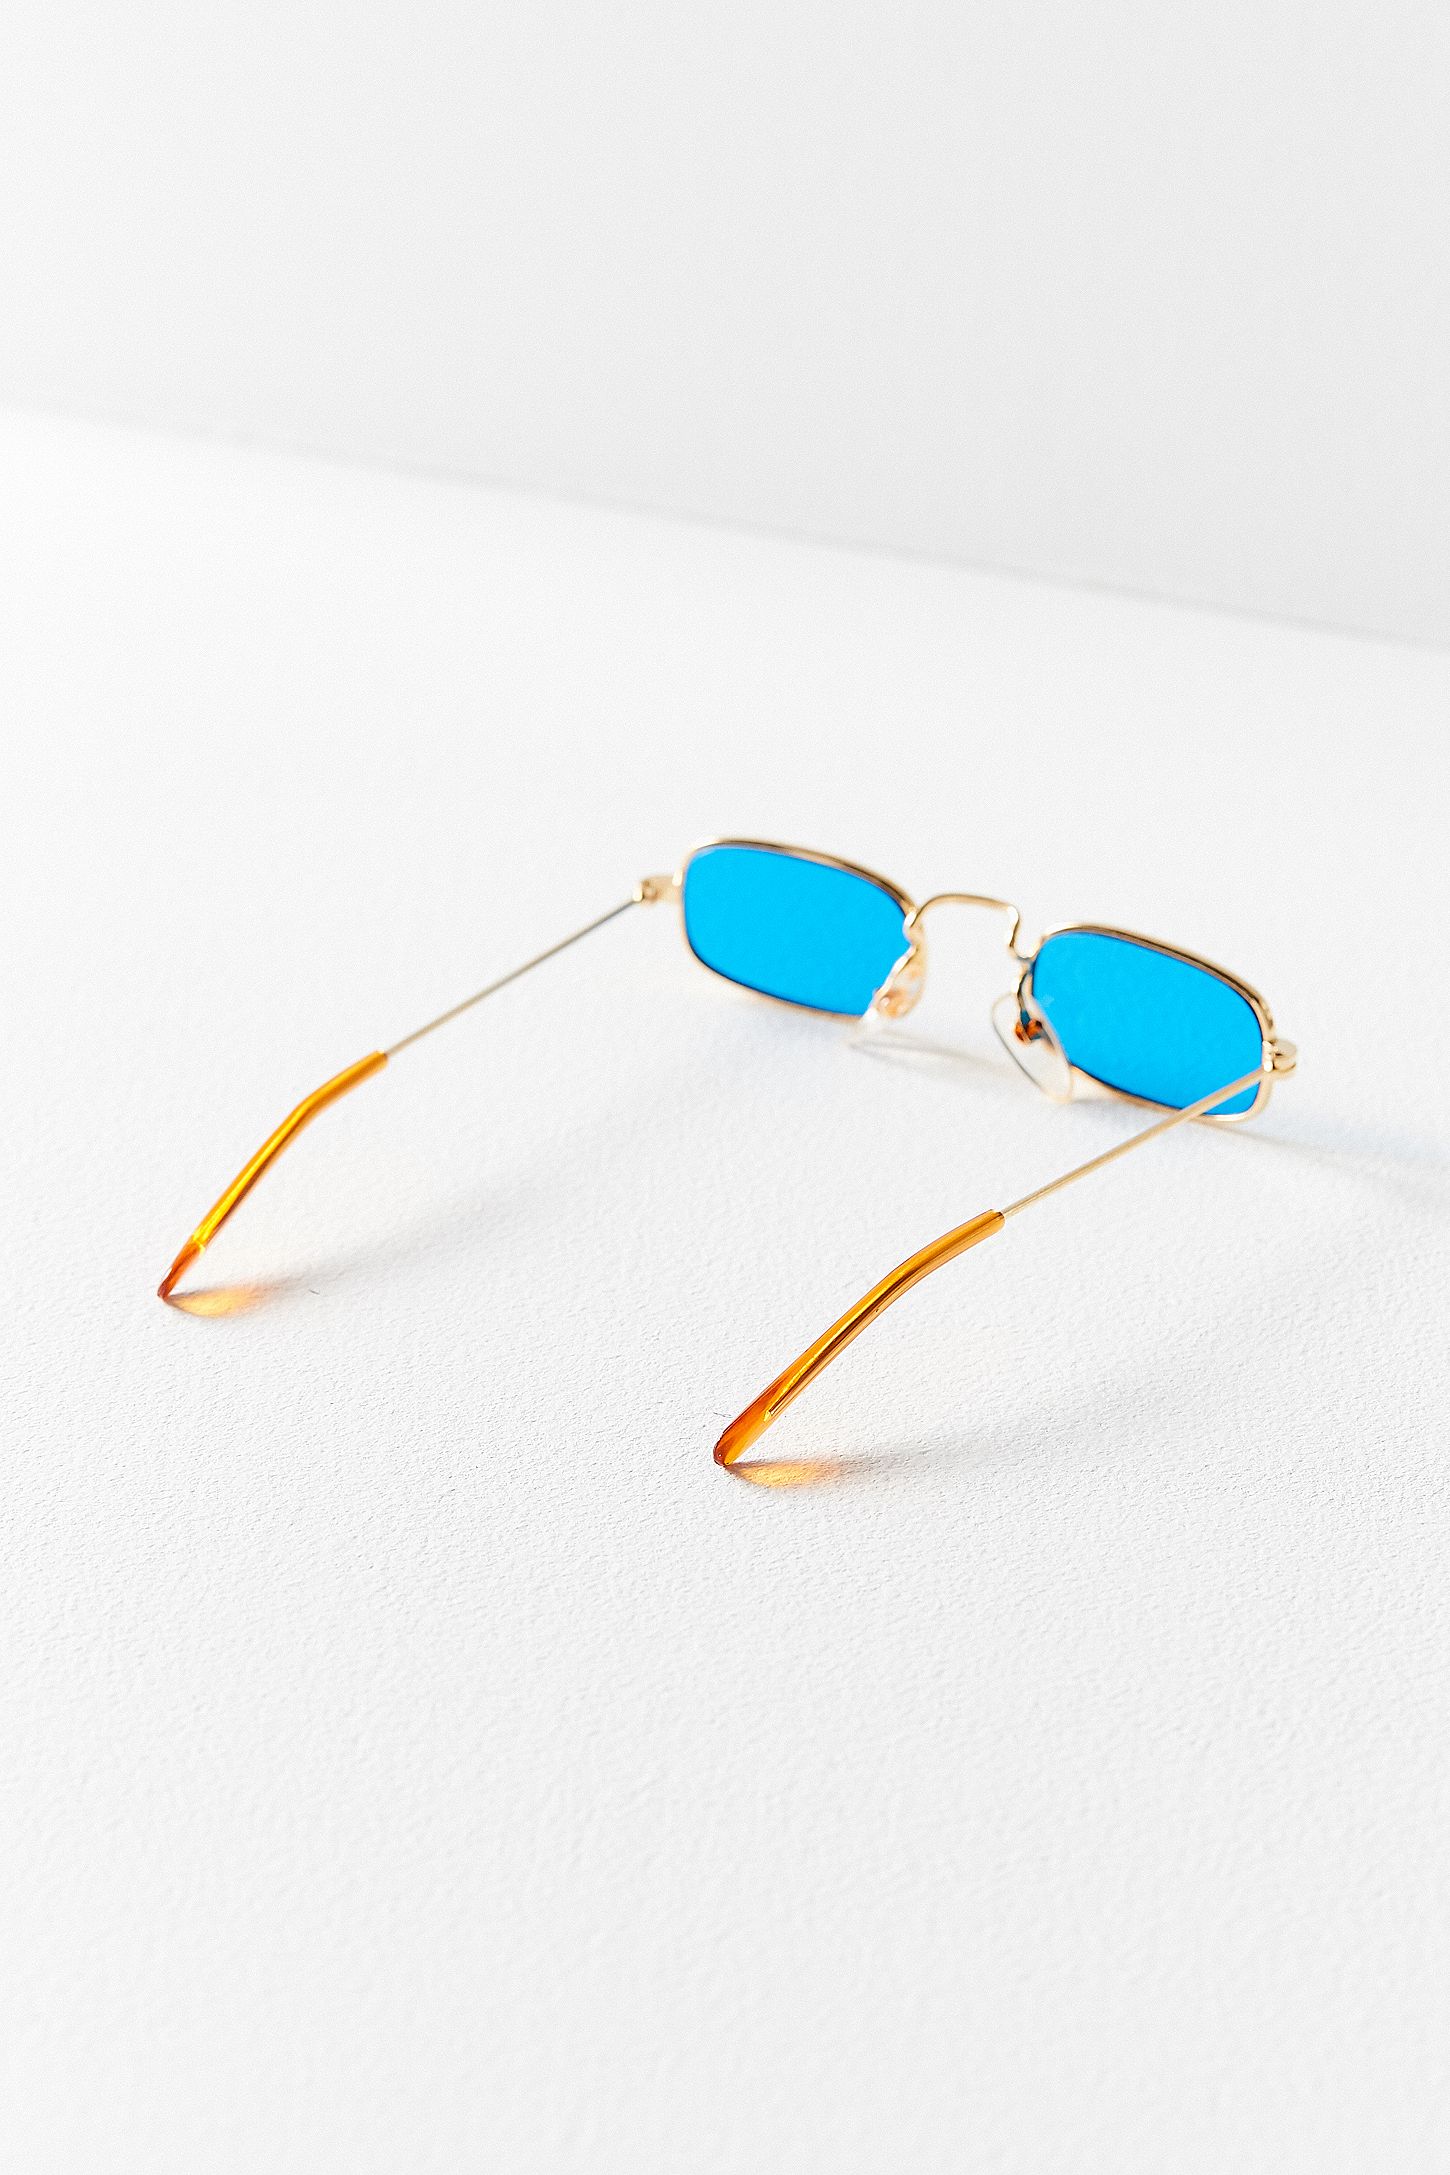 Vintage Clueless Square Sunglasses | Urban Outfitters